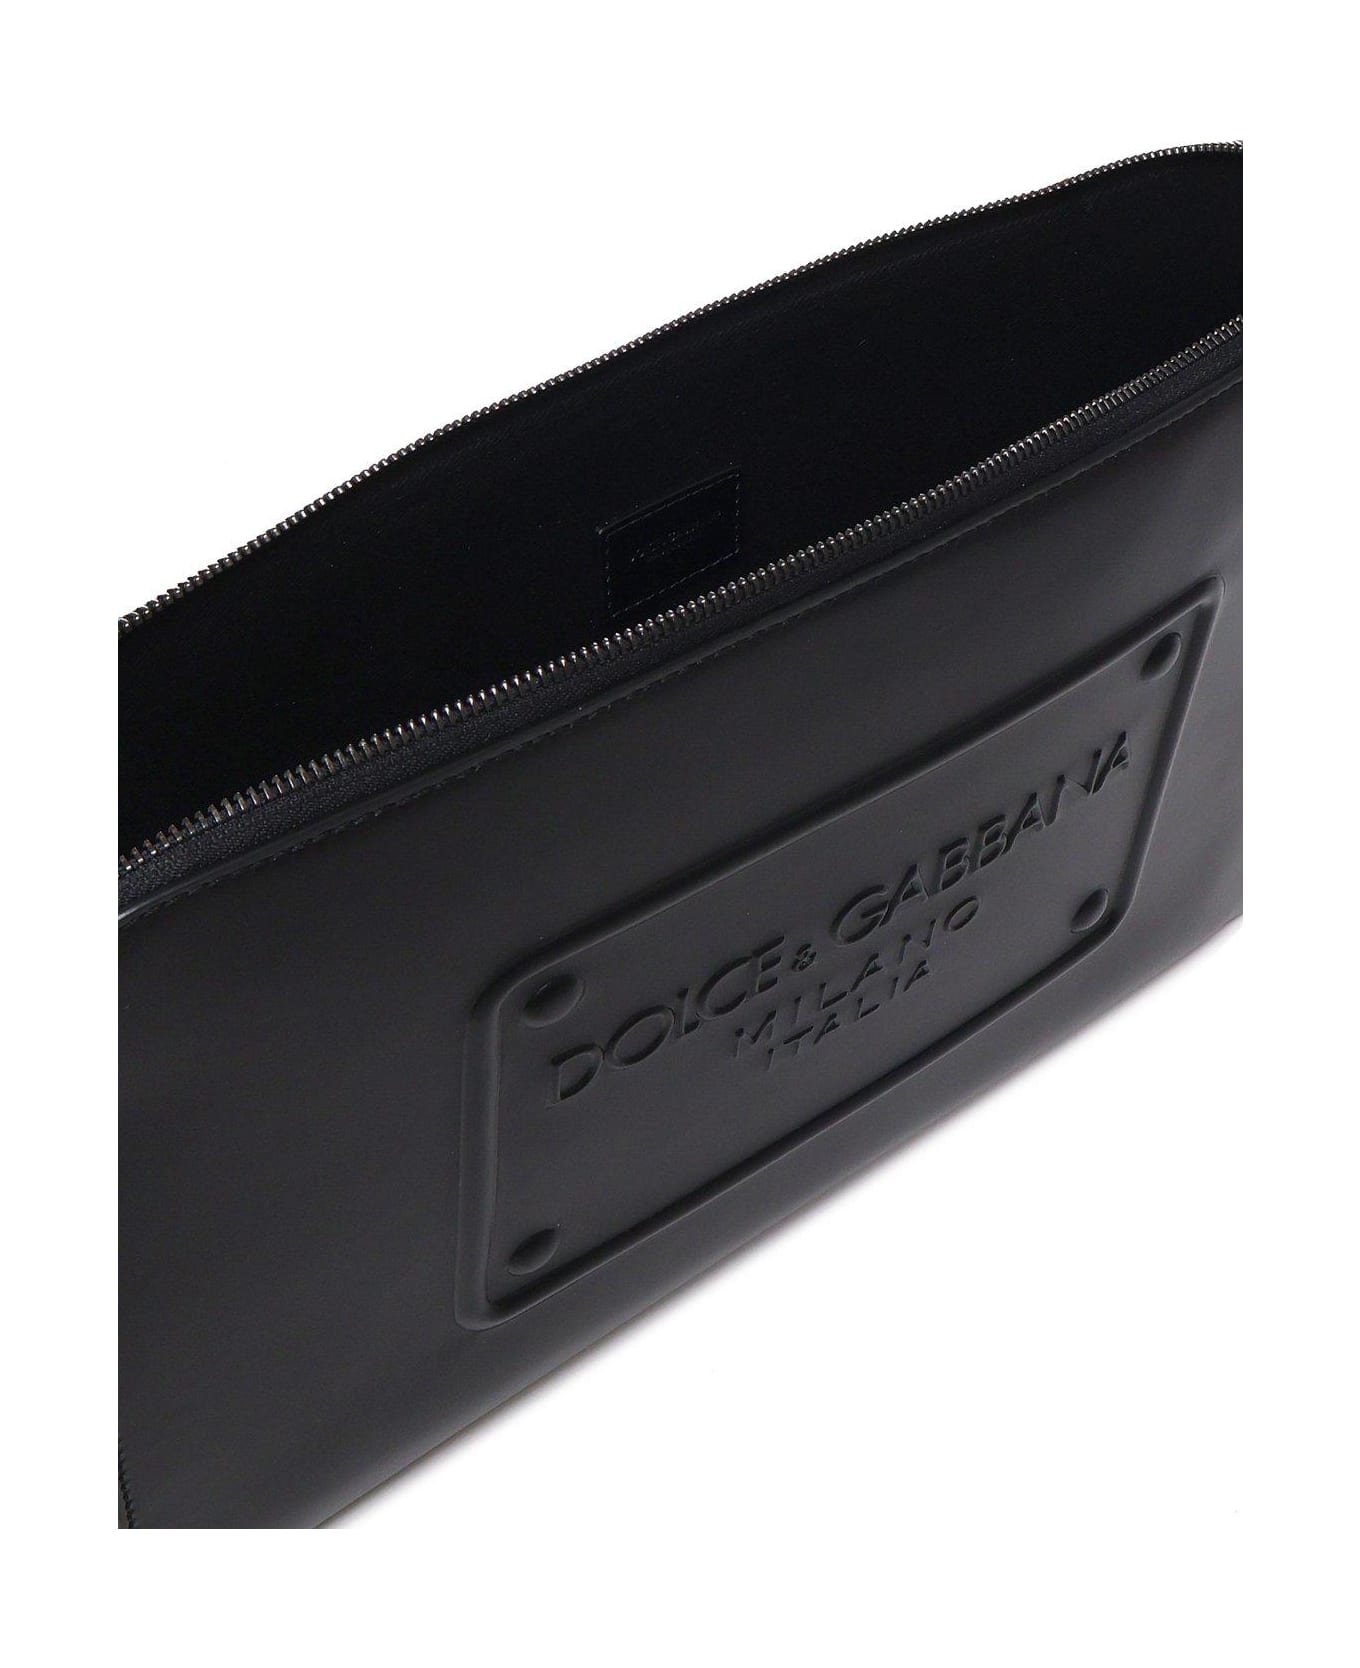 Dolce & Gabbana Milano Logo Embossed Large Pouch - Black バッグ